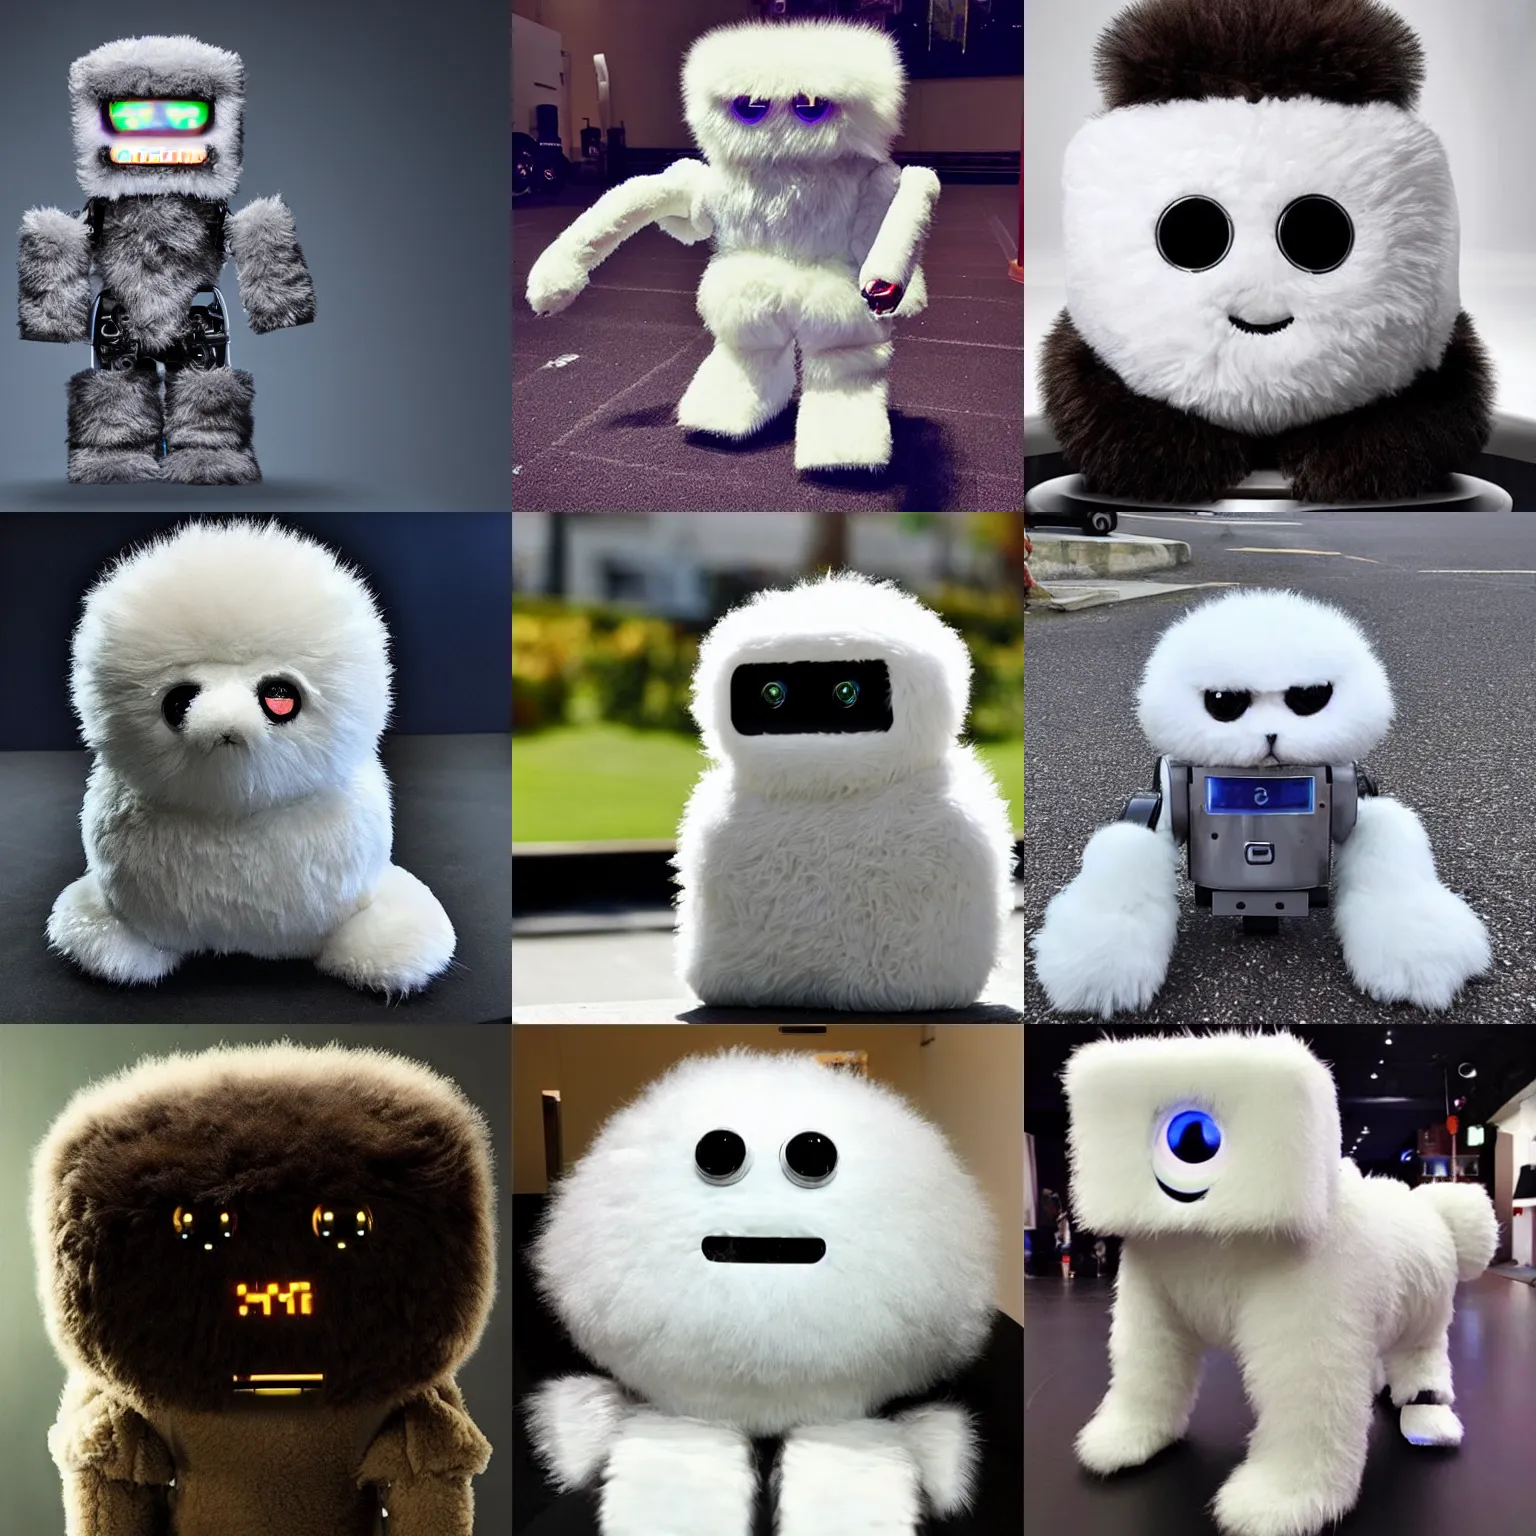 Prompt: <picture quality=4k-ultra-hd mode='attention grabbing'>Adorable fluffy robot so high he looks like [10] Guy</picture>